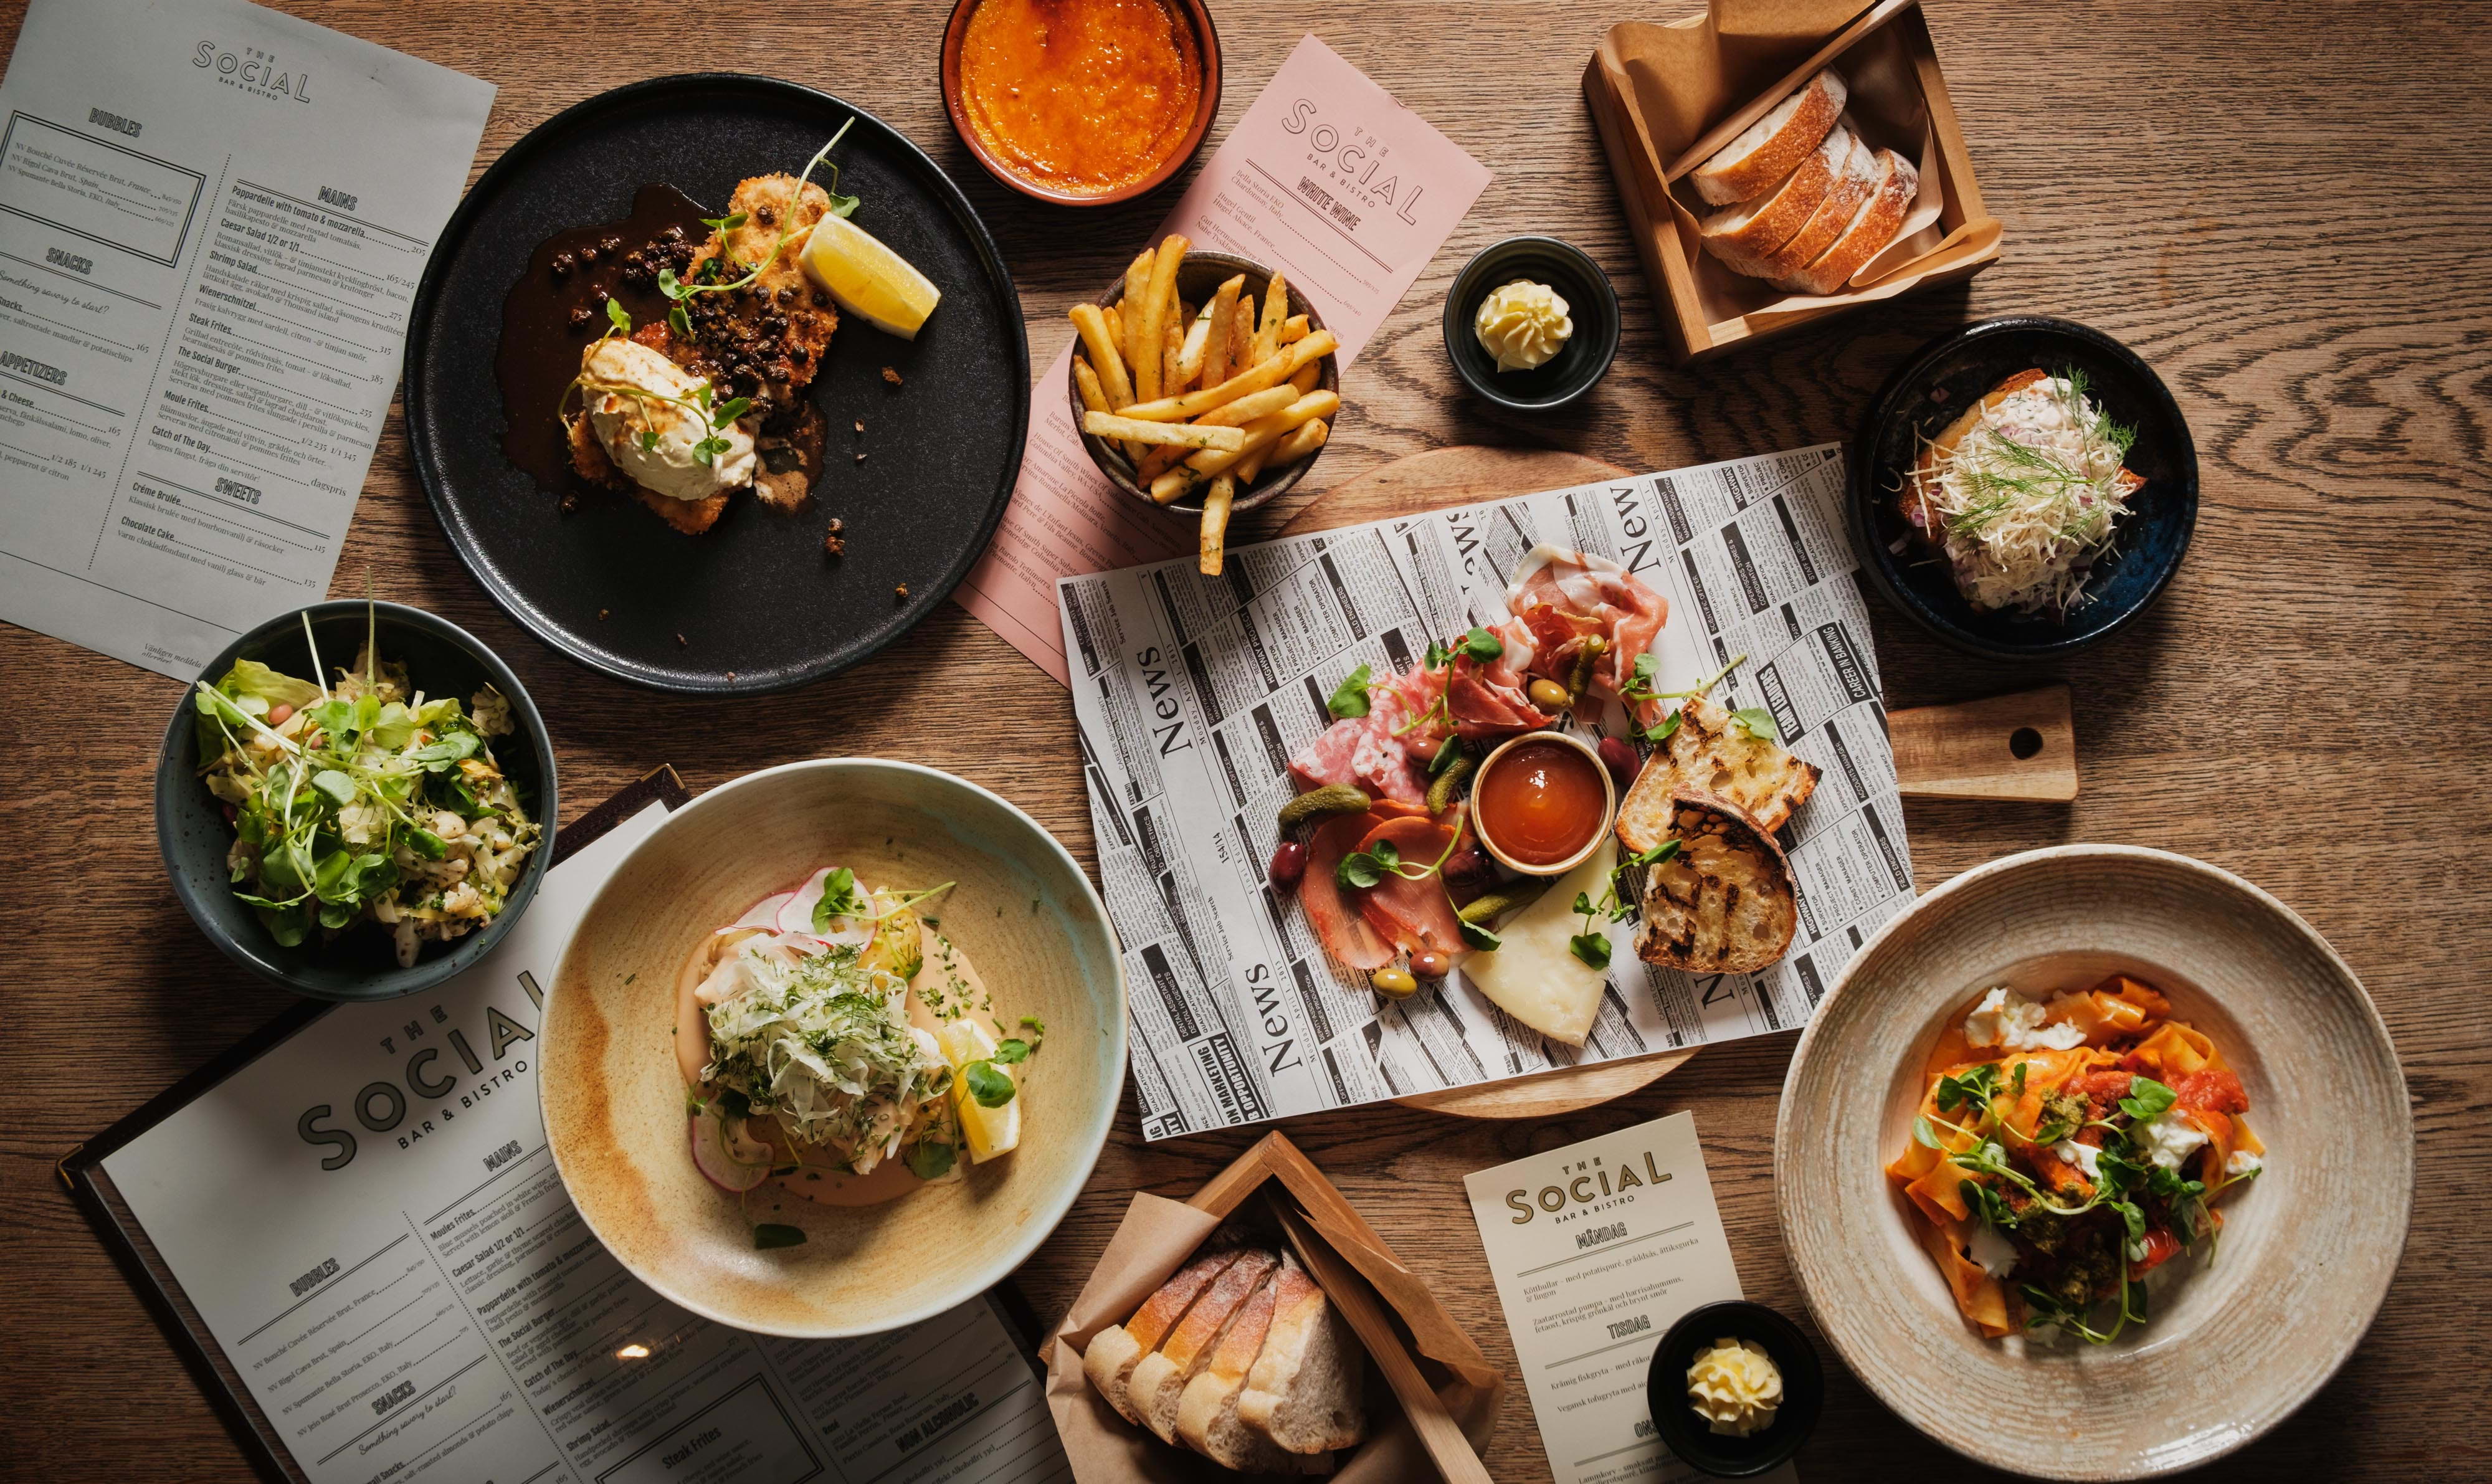 The Social Sign – The hottest restaurants right now